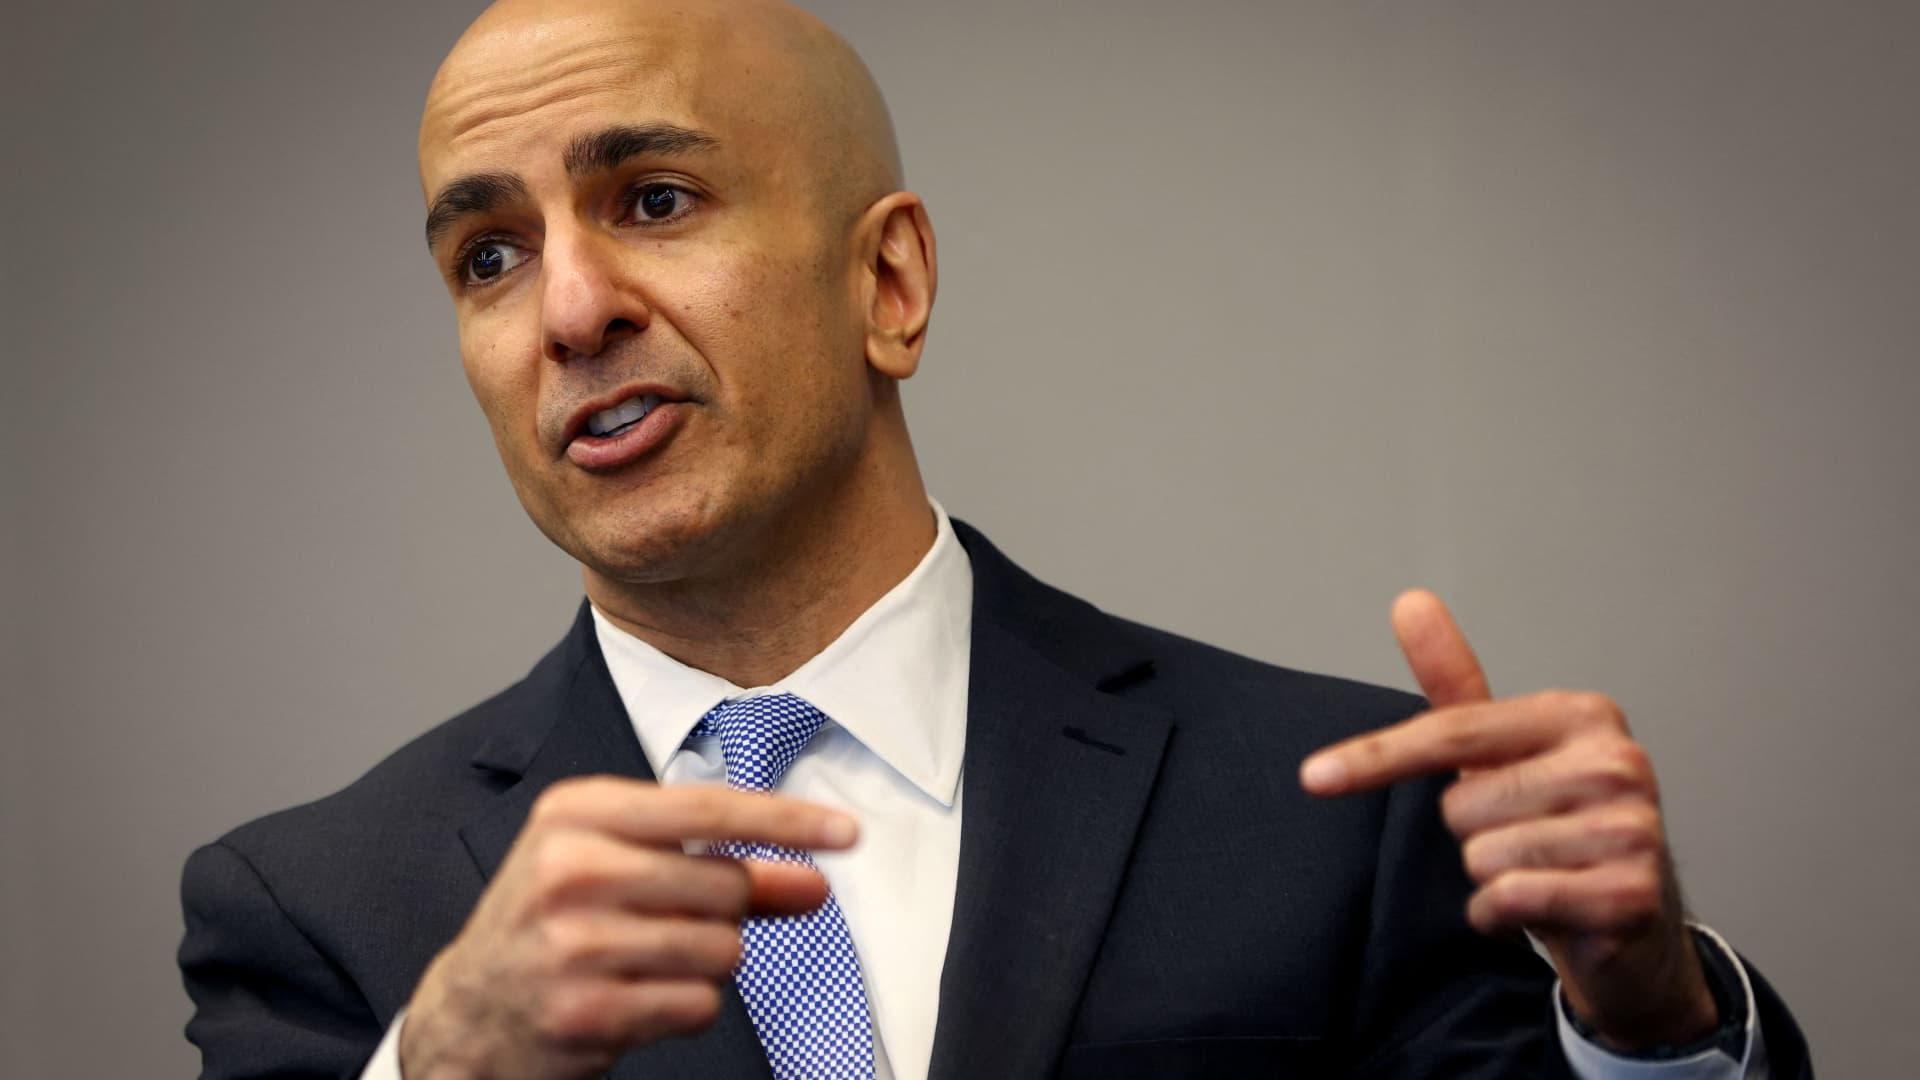 Neel Kashkari, President and CEO of the Federal Reserve Bank of Minneapolis, speaks during an interview with Reuters in New York City, New York, May 22, 2023.